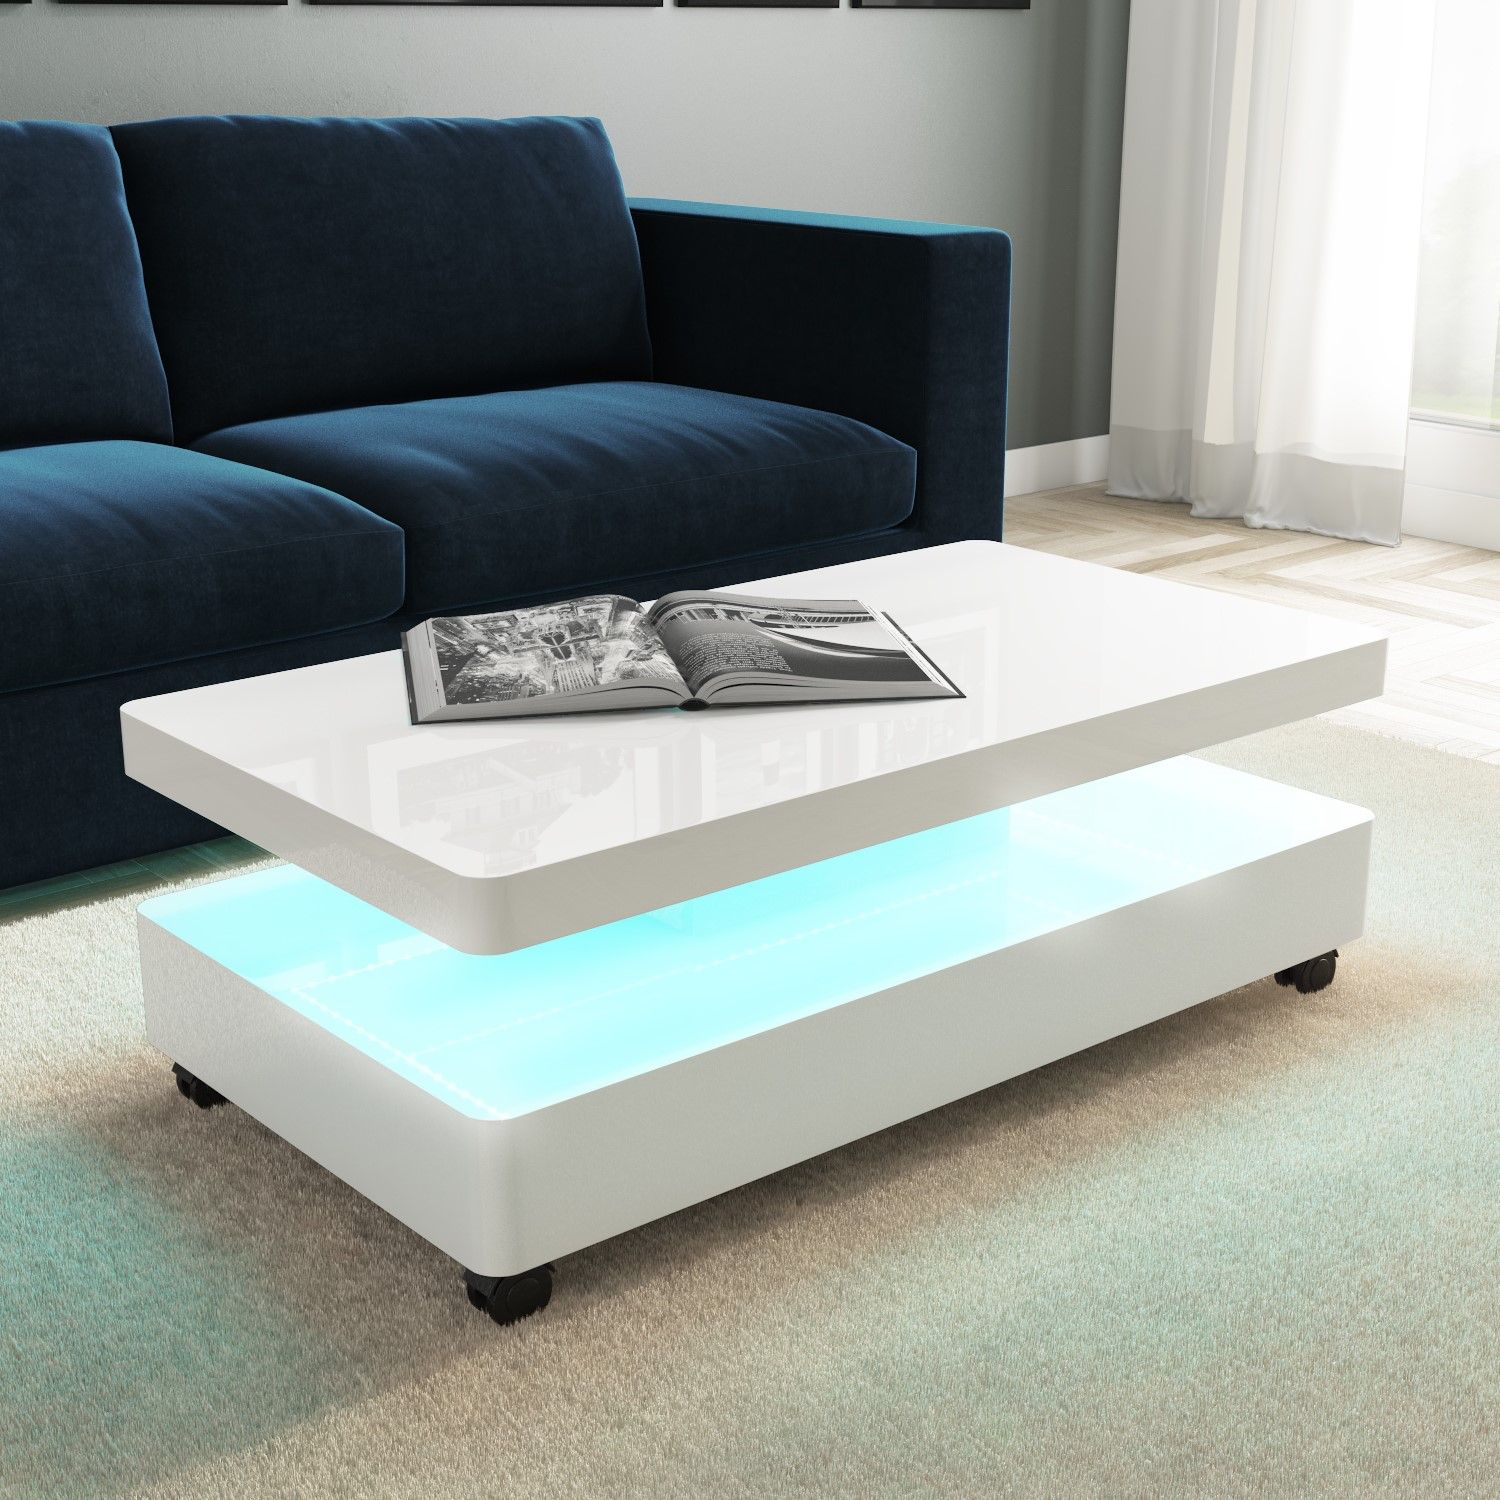 High Gloss White Coffee Table With Led Lighting 5060388562168 | Ebay With Regard To Coffee Tables With Drawers And Led Lights (Photo 5 of 15)